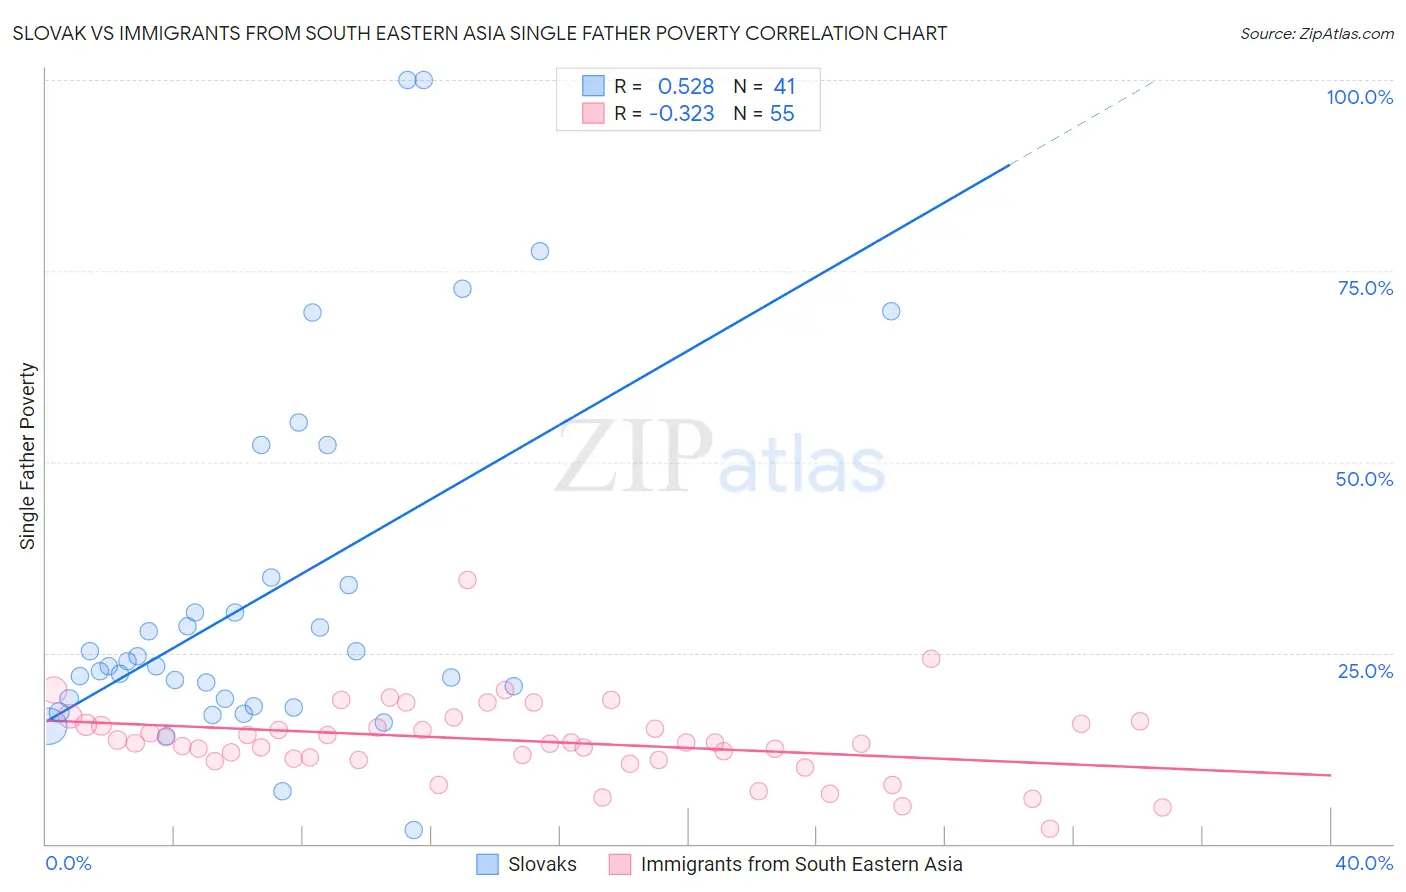 Slovak vs Immigrants from South Eastern Asia Single Father Poverty